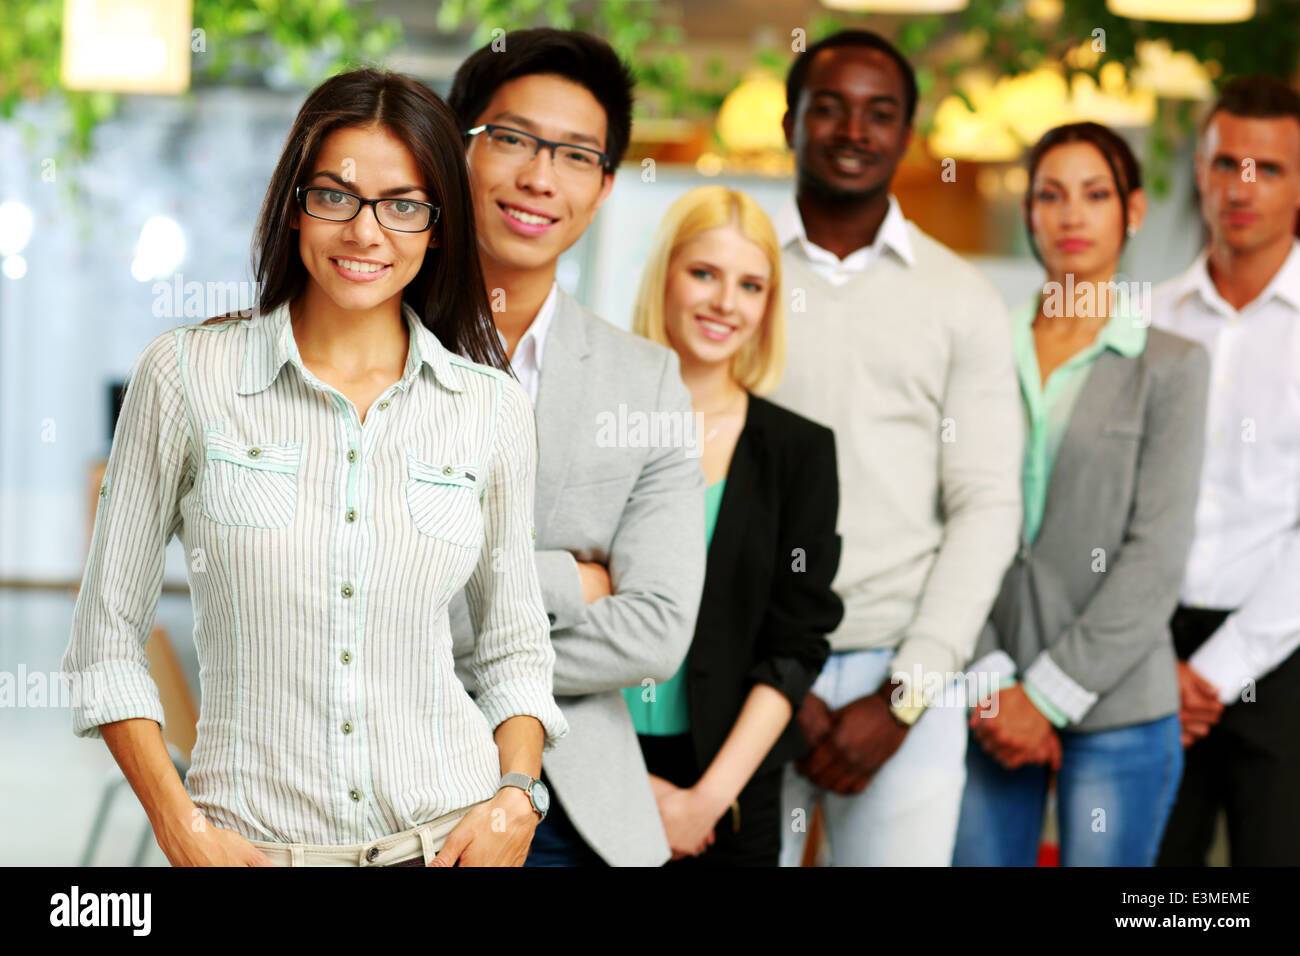 Smiling group of business people in the office lined up Stock Photo